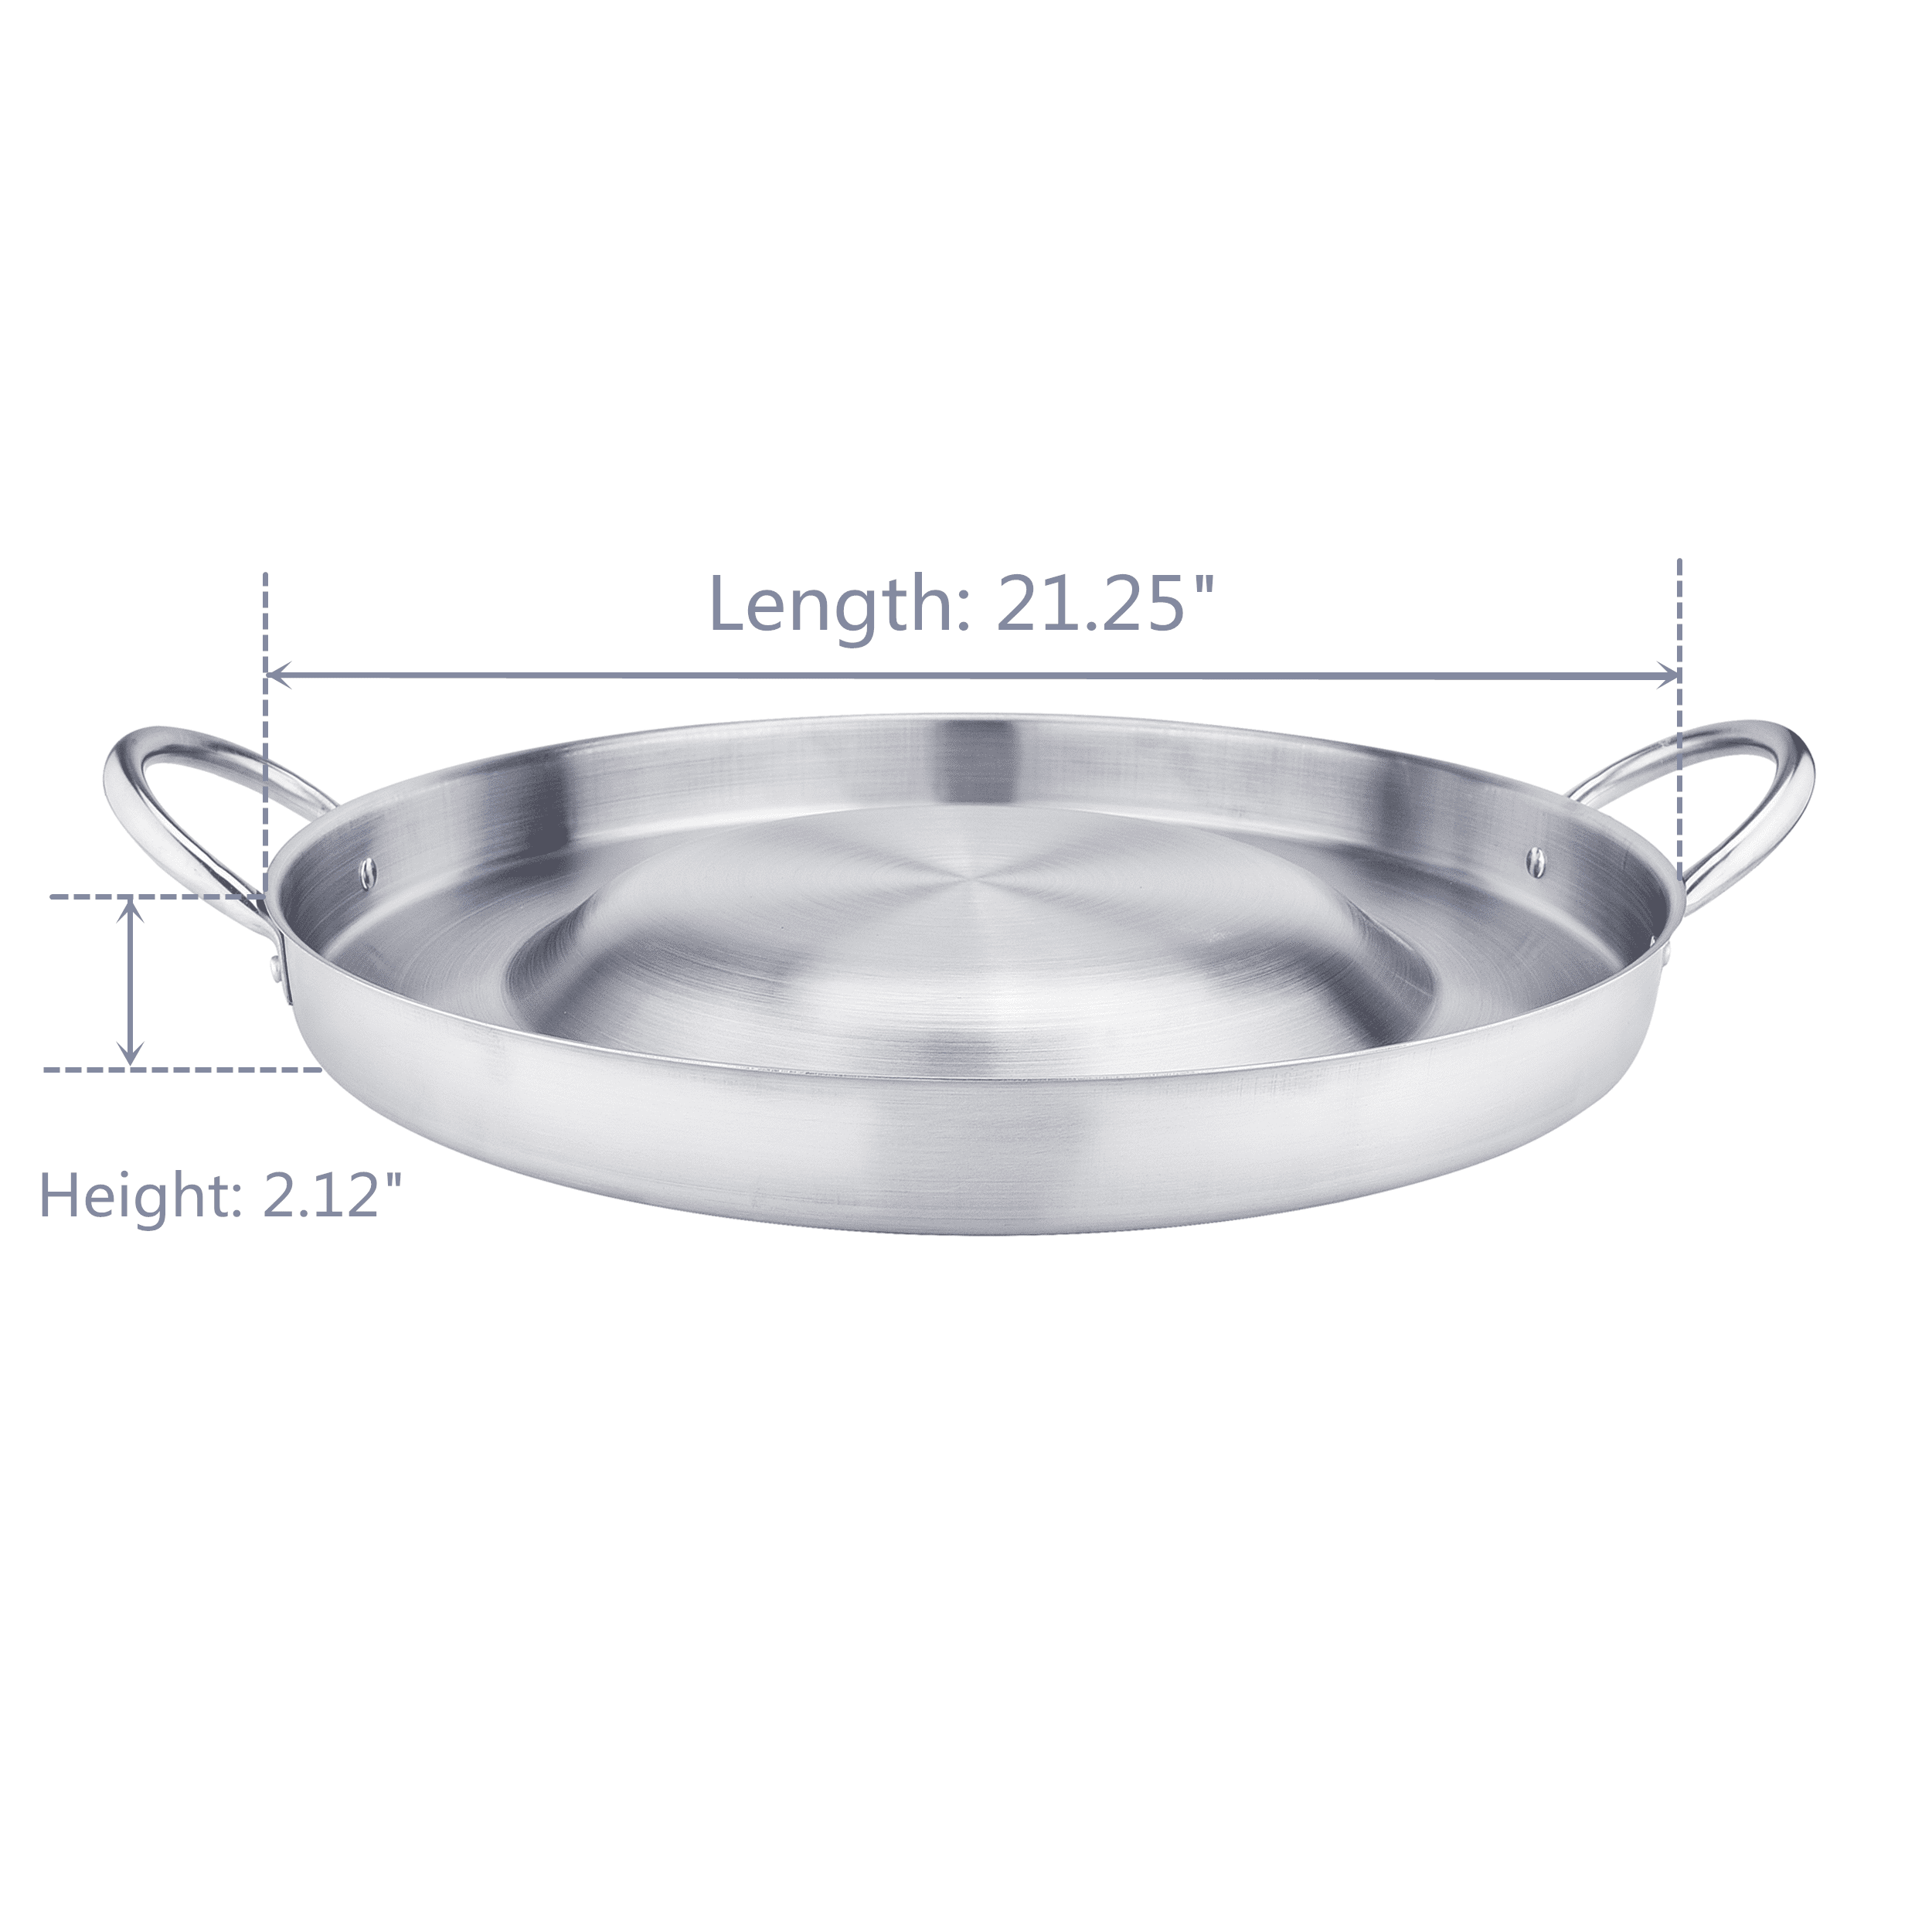 CONCORD Stainless Steel Comal For Taco Fish Frying Griddle Wok Cookware Bowl 